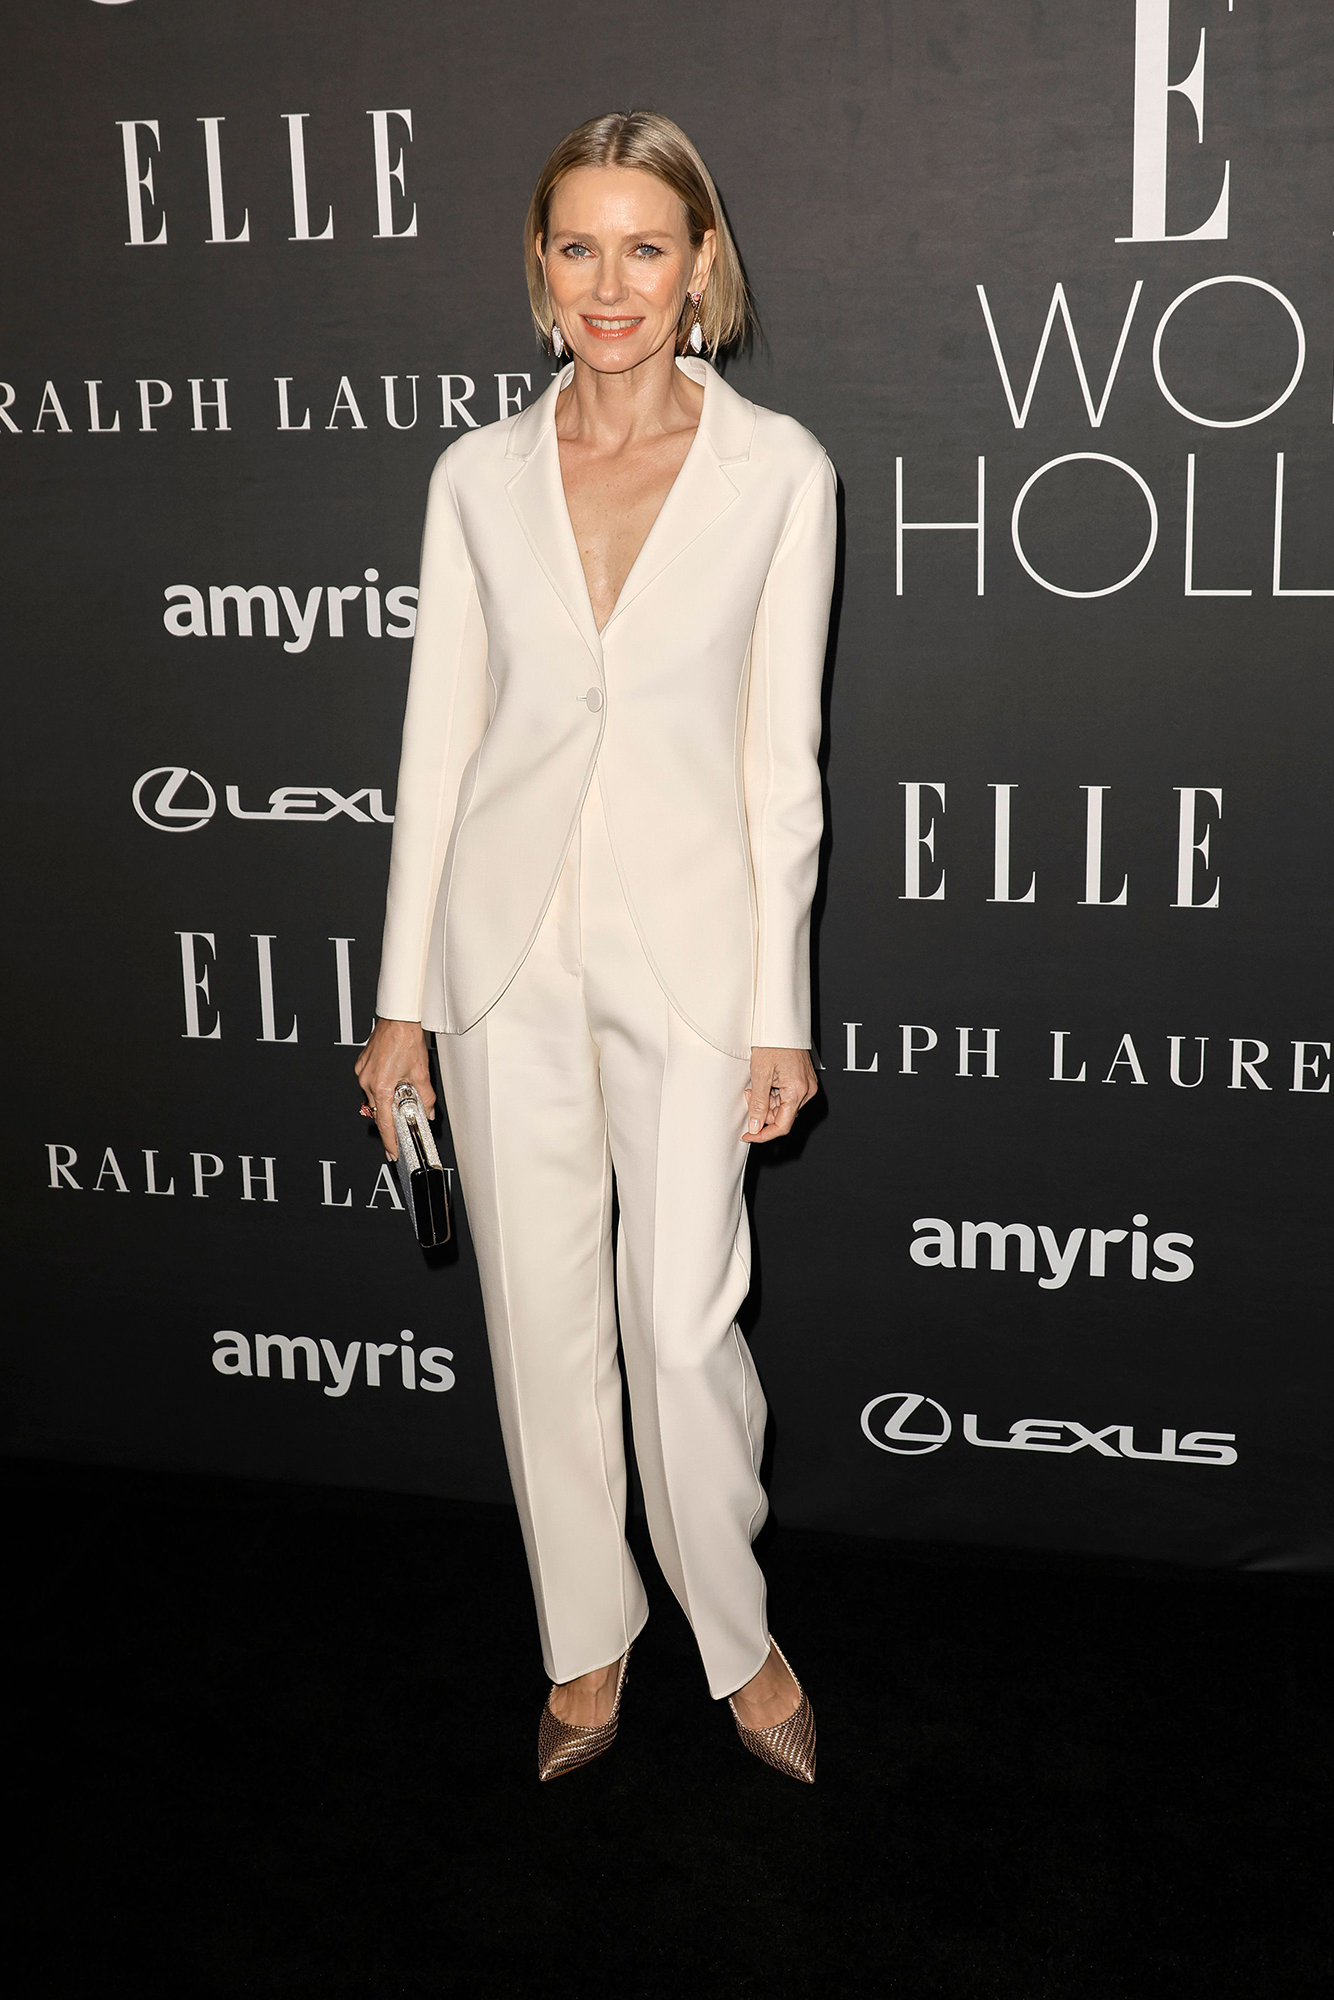 Naomi Watts wears Dior Haute Couture at the Elle Women in Hollywood 2022 celebration